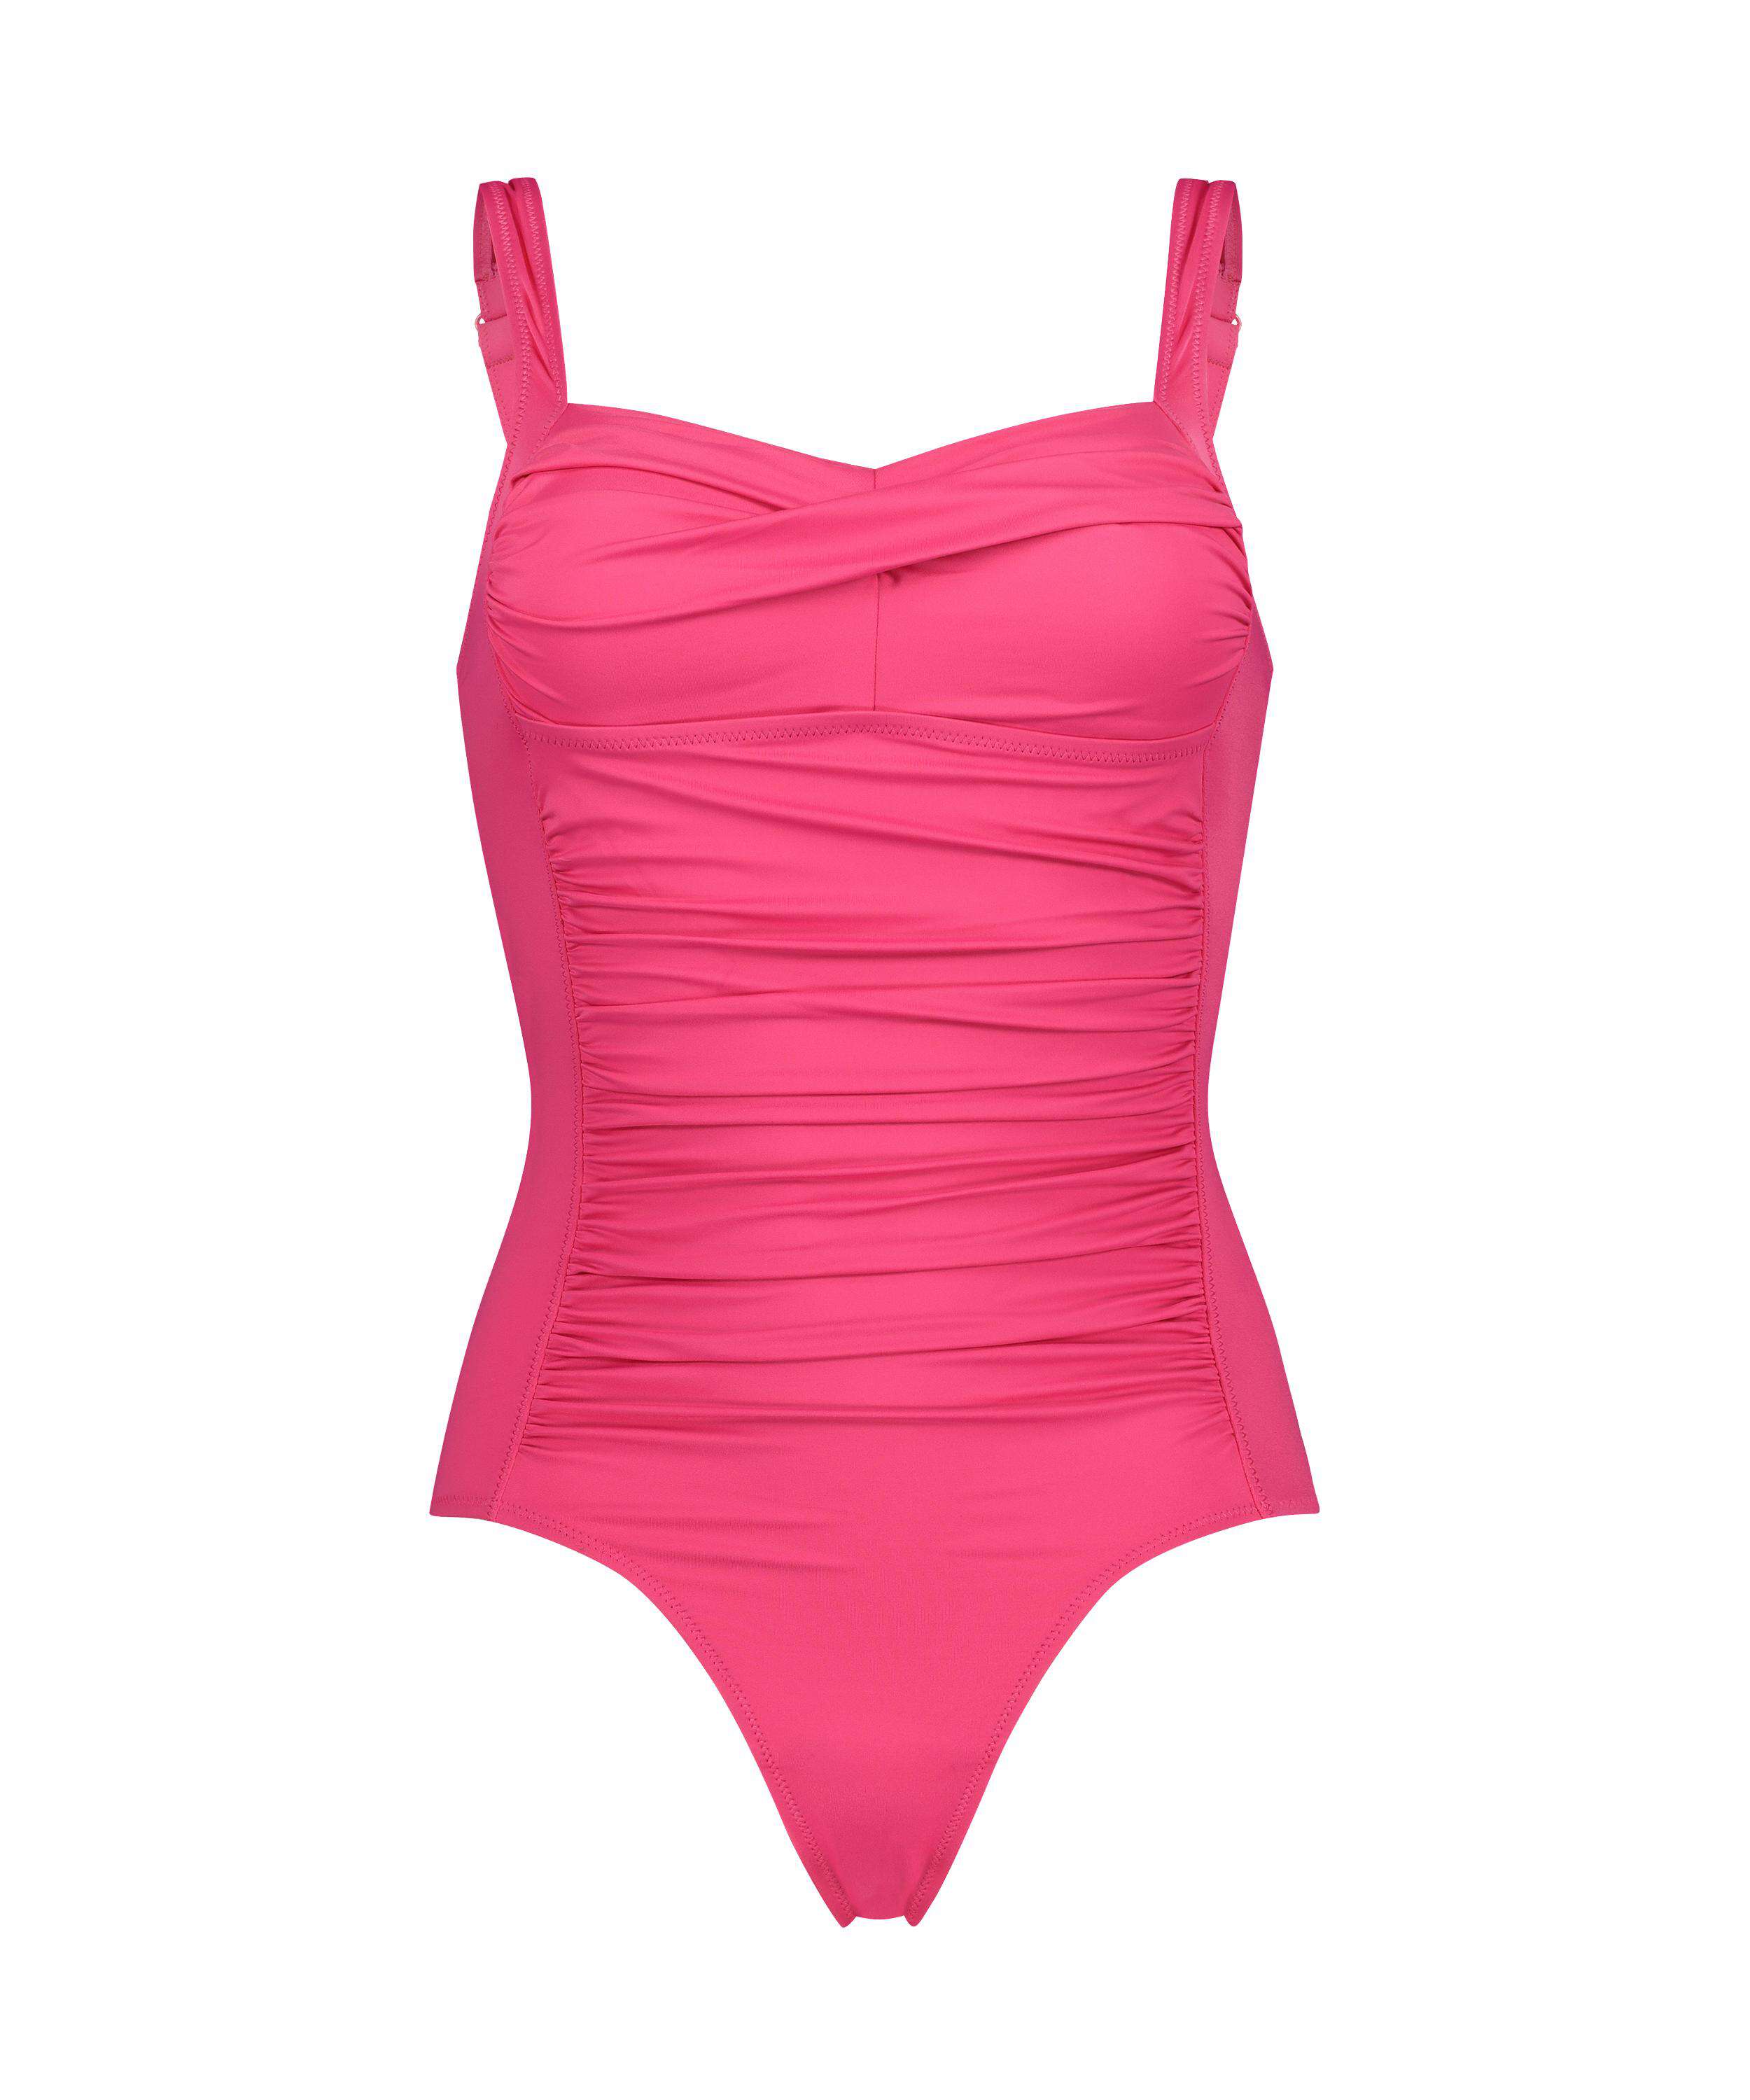 Deluxe swimsuit, Pink, main